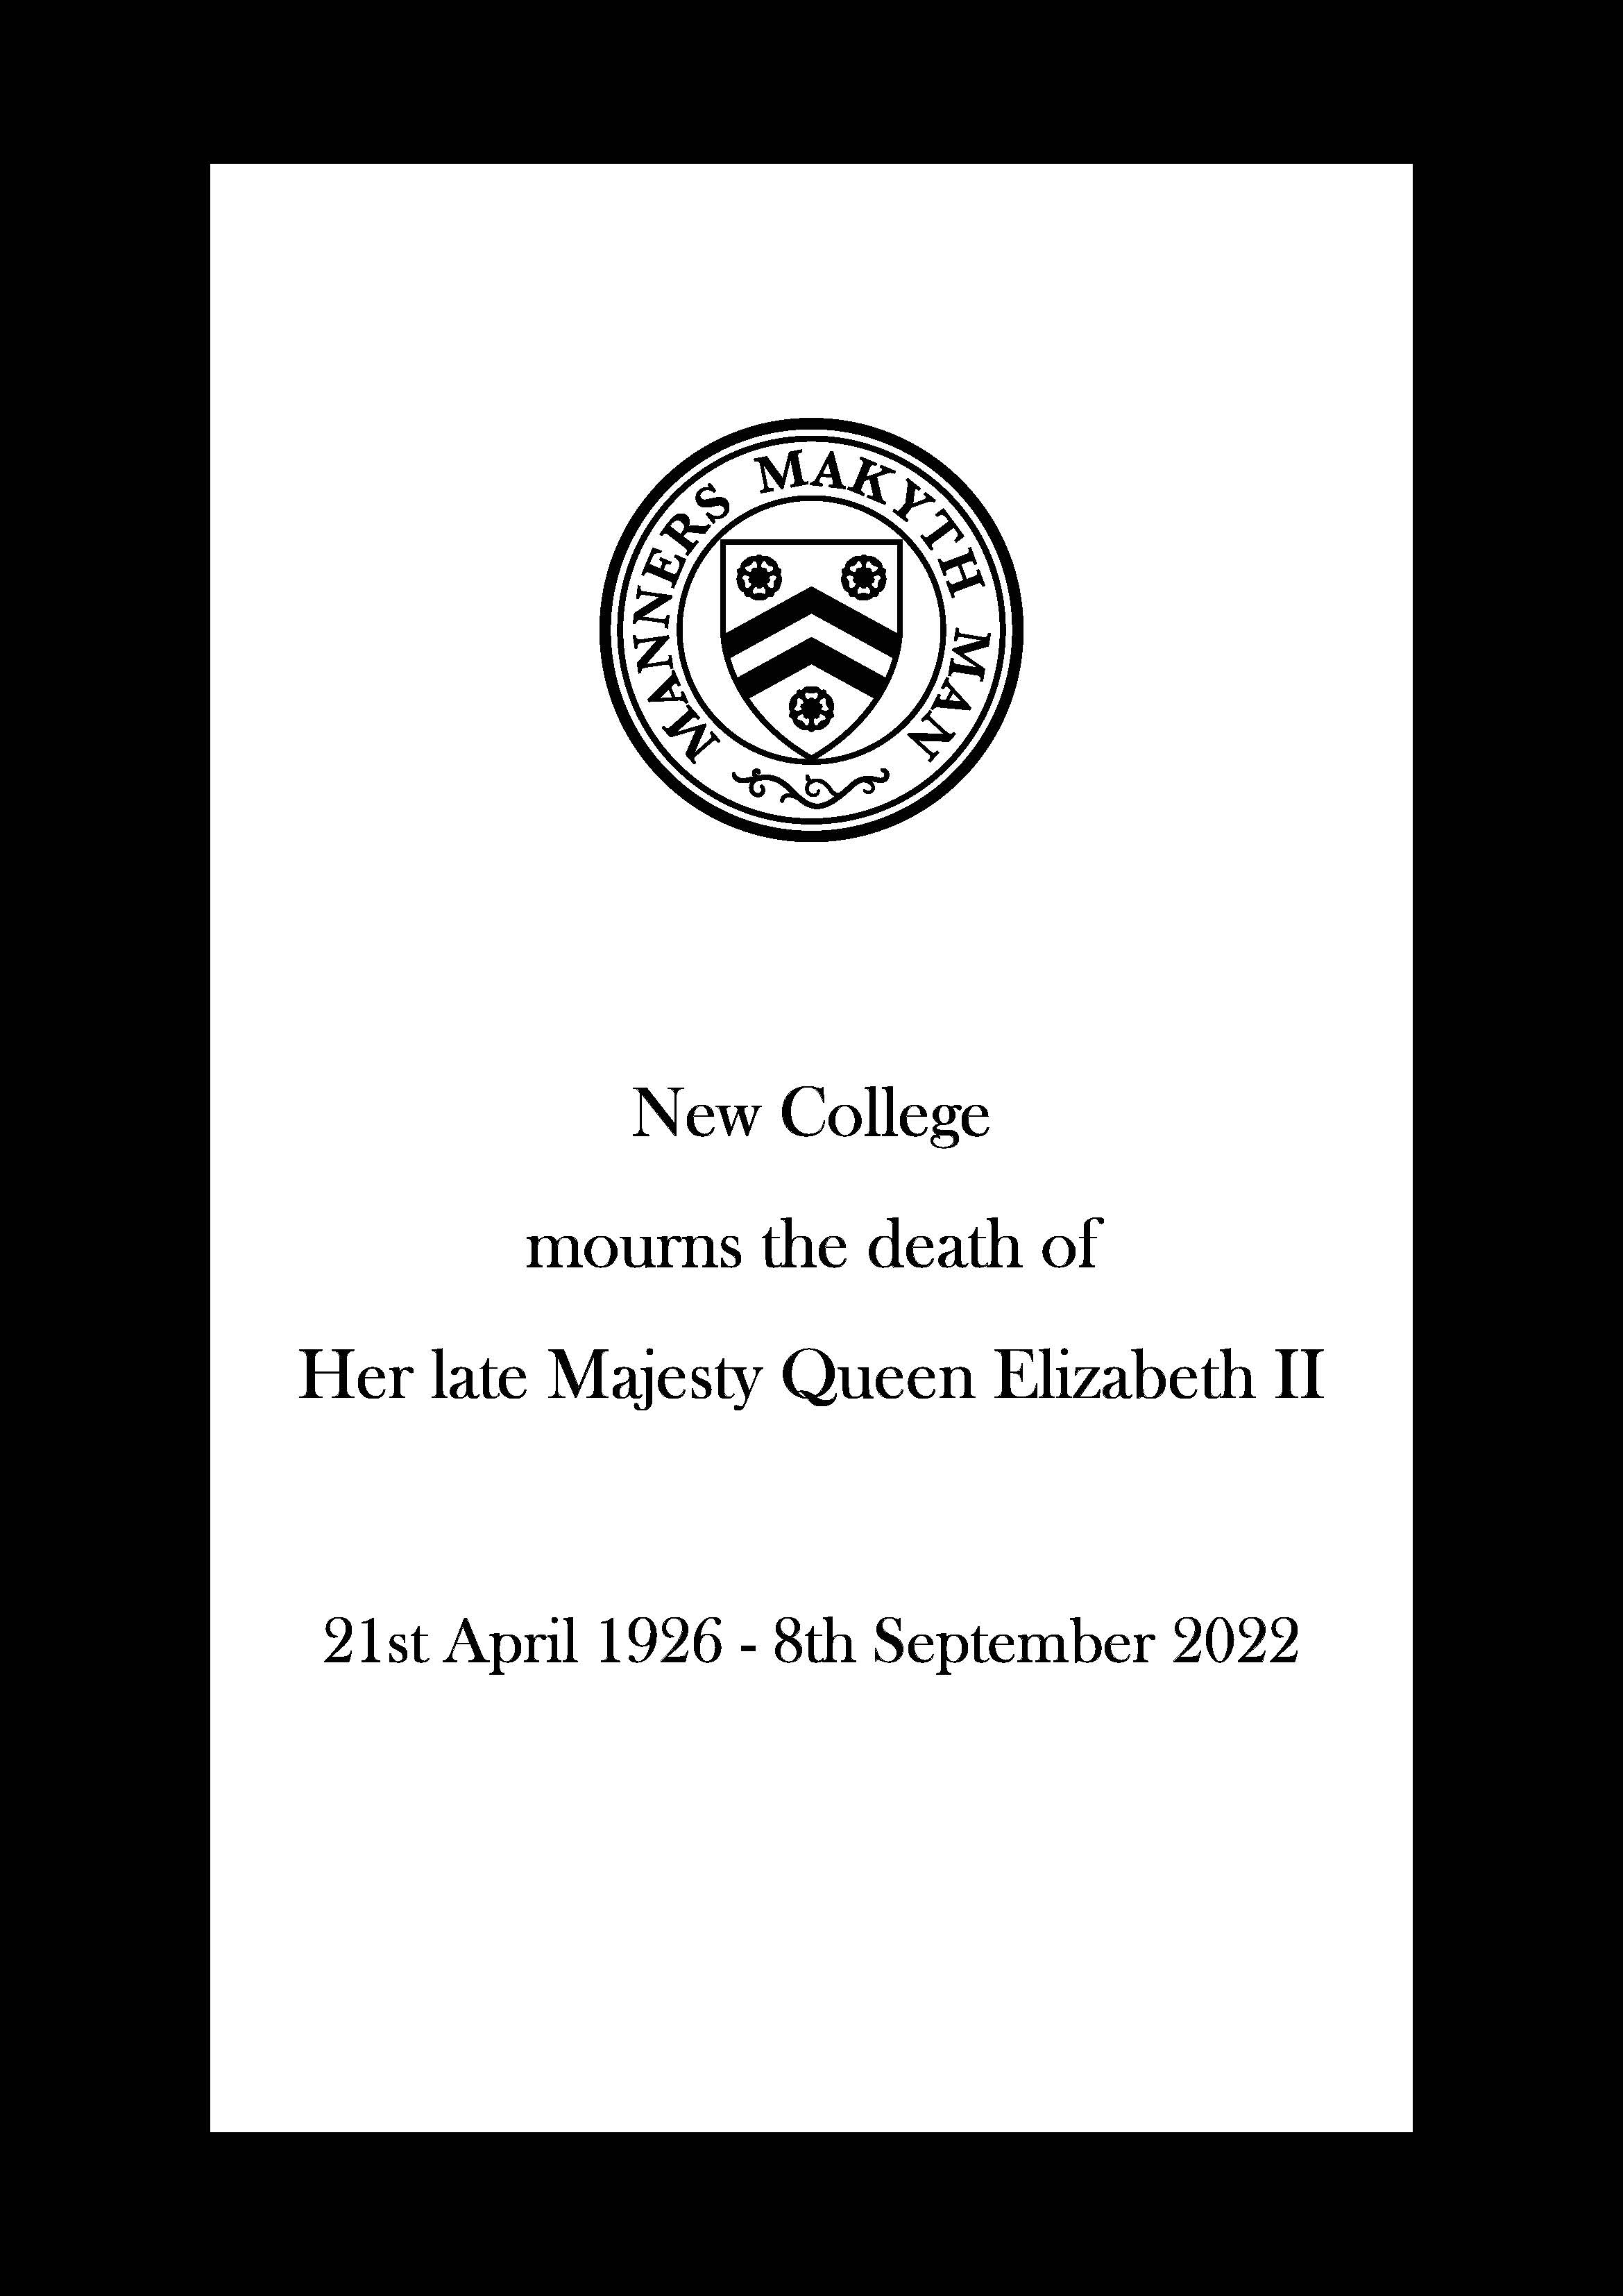 New College crest with text: 'New College mourns the death of Her late Majesty Queen Elizabeth II 21st April 1926 - 8th September 2022' and black border